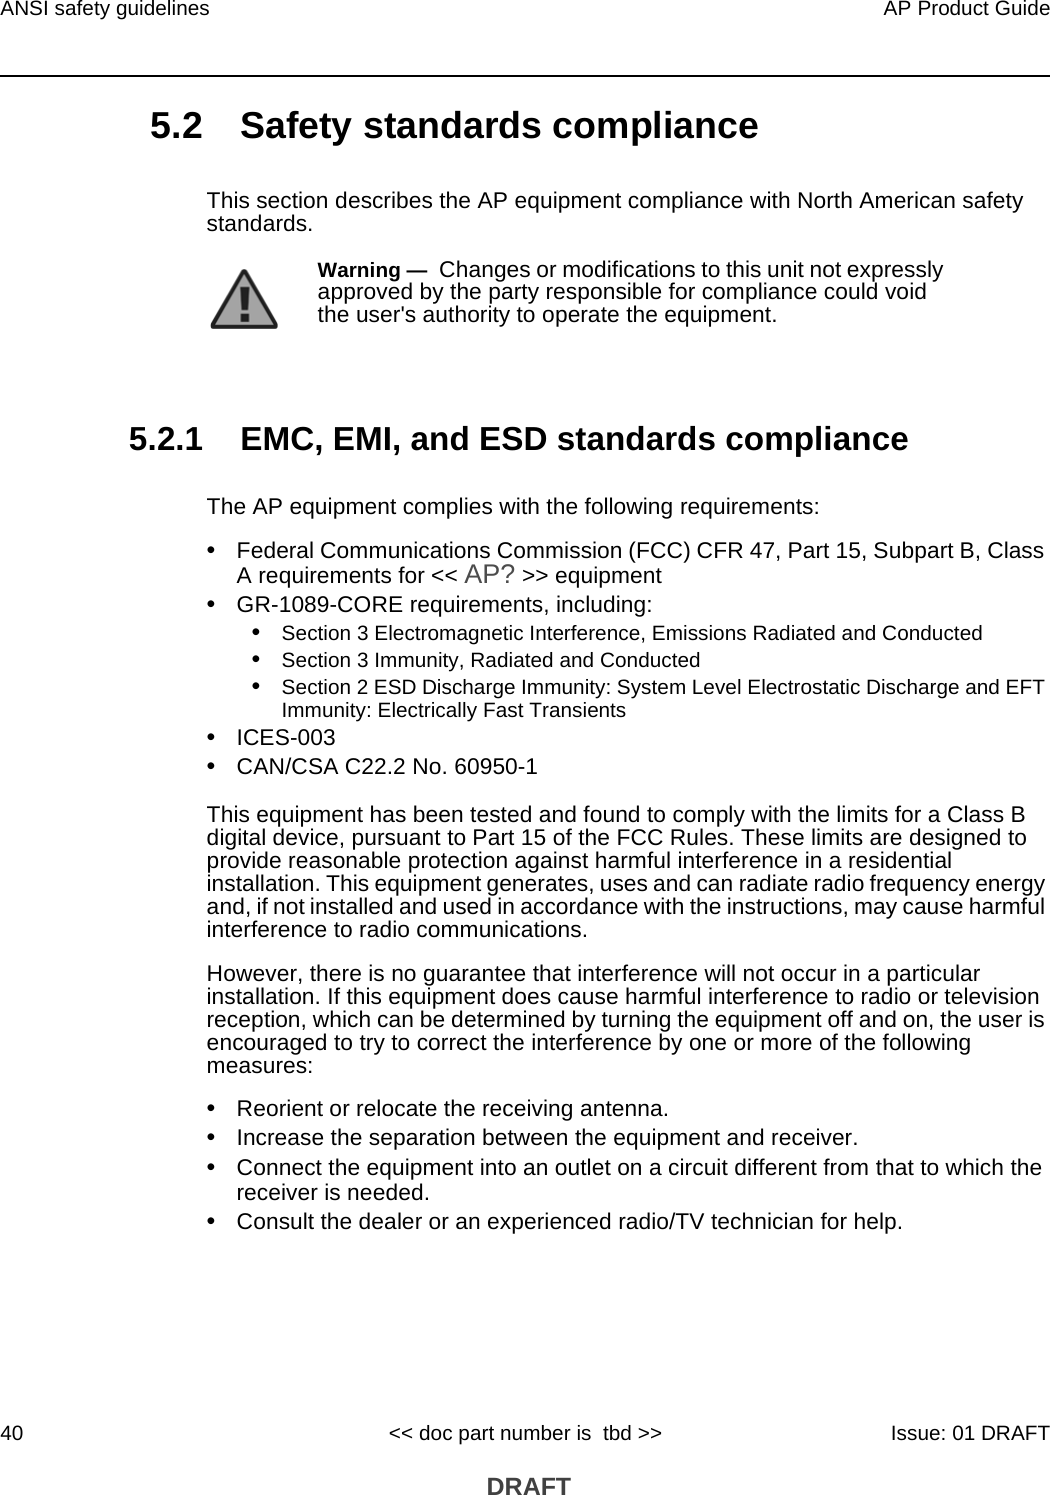 ANSI safety guidelines40AP Product Guide&lt;&lt; doc part number is  tbd &gt;&gt; Issue: 01 DRAFT DRAFT5.2 Safety standards complianceThis section describes the AP equipment compliance with North American safety standards.5.2.1 EMC, EMI, and ESD standards complianceThe AP equipment complies with the following requirements:•Federal Communications Commission (FCC) CFR 47, Part 15, Subpart B, Class A requirements for &lt;&lt; AP? &gt;&gt; equipment•GR-1089-CORE requirements, including:•Section 3 Electromagnetic Interference, Emissions Radiated and Conducted•Section 3 Immunity, Radiated and Conducted•Section 2 ESD Discharge Immunity: System Level Electrostatic Discharge and EFT Immunity: Electrically Fast Transients•ICES-003•CAN/CSA C22.2 No. 60950-1This equipment has been tested and found to comply with the limits for a Class B digital device, pursuant to Part 15 of the FCC Rules. These limits are designed to provide reasonable protection against harmful interference in a residential installation. This equipment generates, uses and can radiate radio frequency energy and, if not installed and used in accordance with the instructions, may cause harmful interference to radio communications.However, there is no guarantee that interference will not occur in a particular installation. If this equipment does cause harmful interference to radio or television reception, which can be determined by turning the equipment off and on, the user is encouraged to try to correct the interference by one or more of the following measures:•Reorient or relocate the receiving antenna.•Increase the separation between the equipment and receiver.•Connect the equipment into an outlet on a circuit different from that to which the receiver is needed.•Consult the dealer or an experienced radio/TV technician for help.Warning —  Changes or modifications to this unit not expressly approved by the party responsible for compliance could void the user&apos;s authority to operate the equipment.